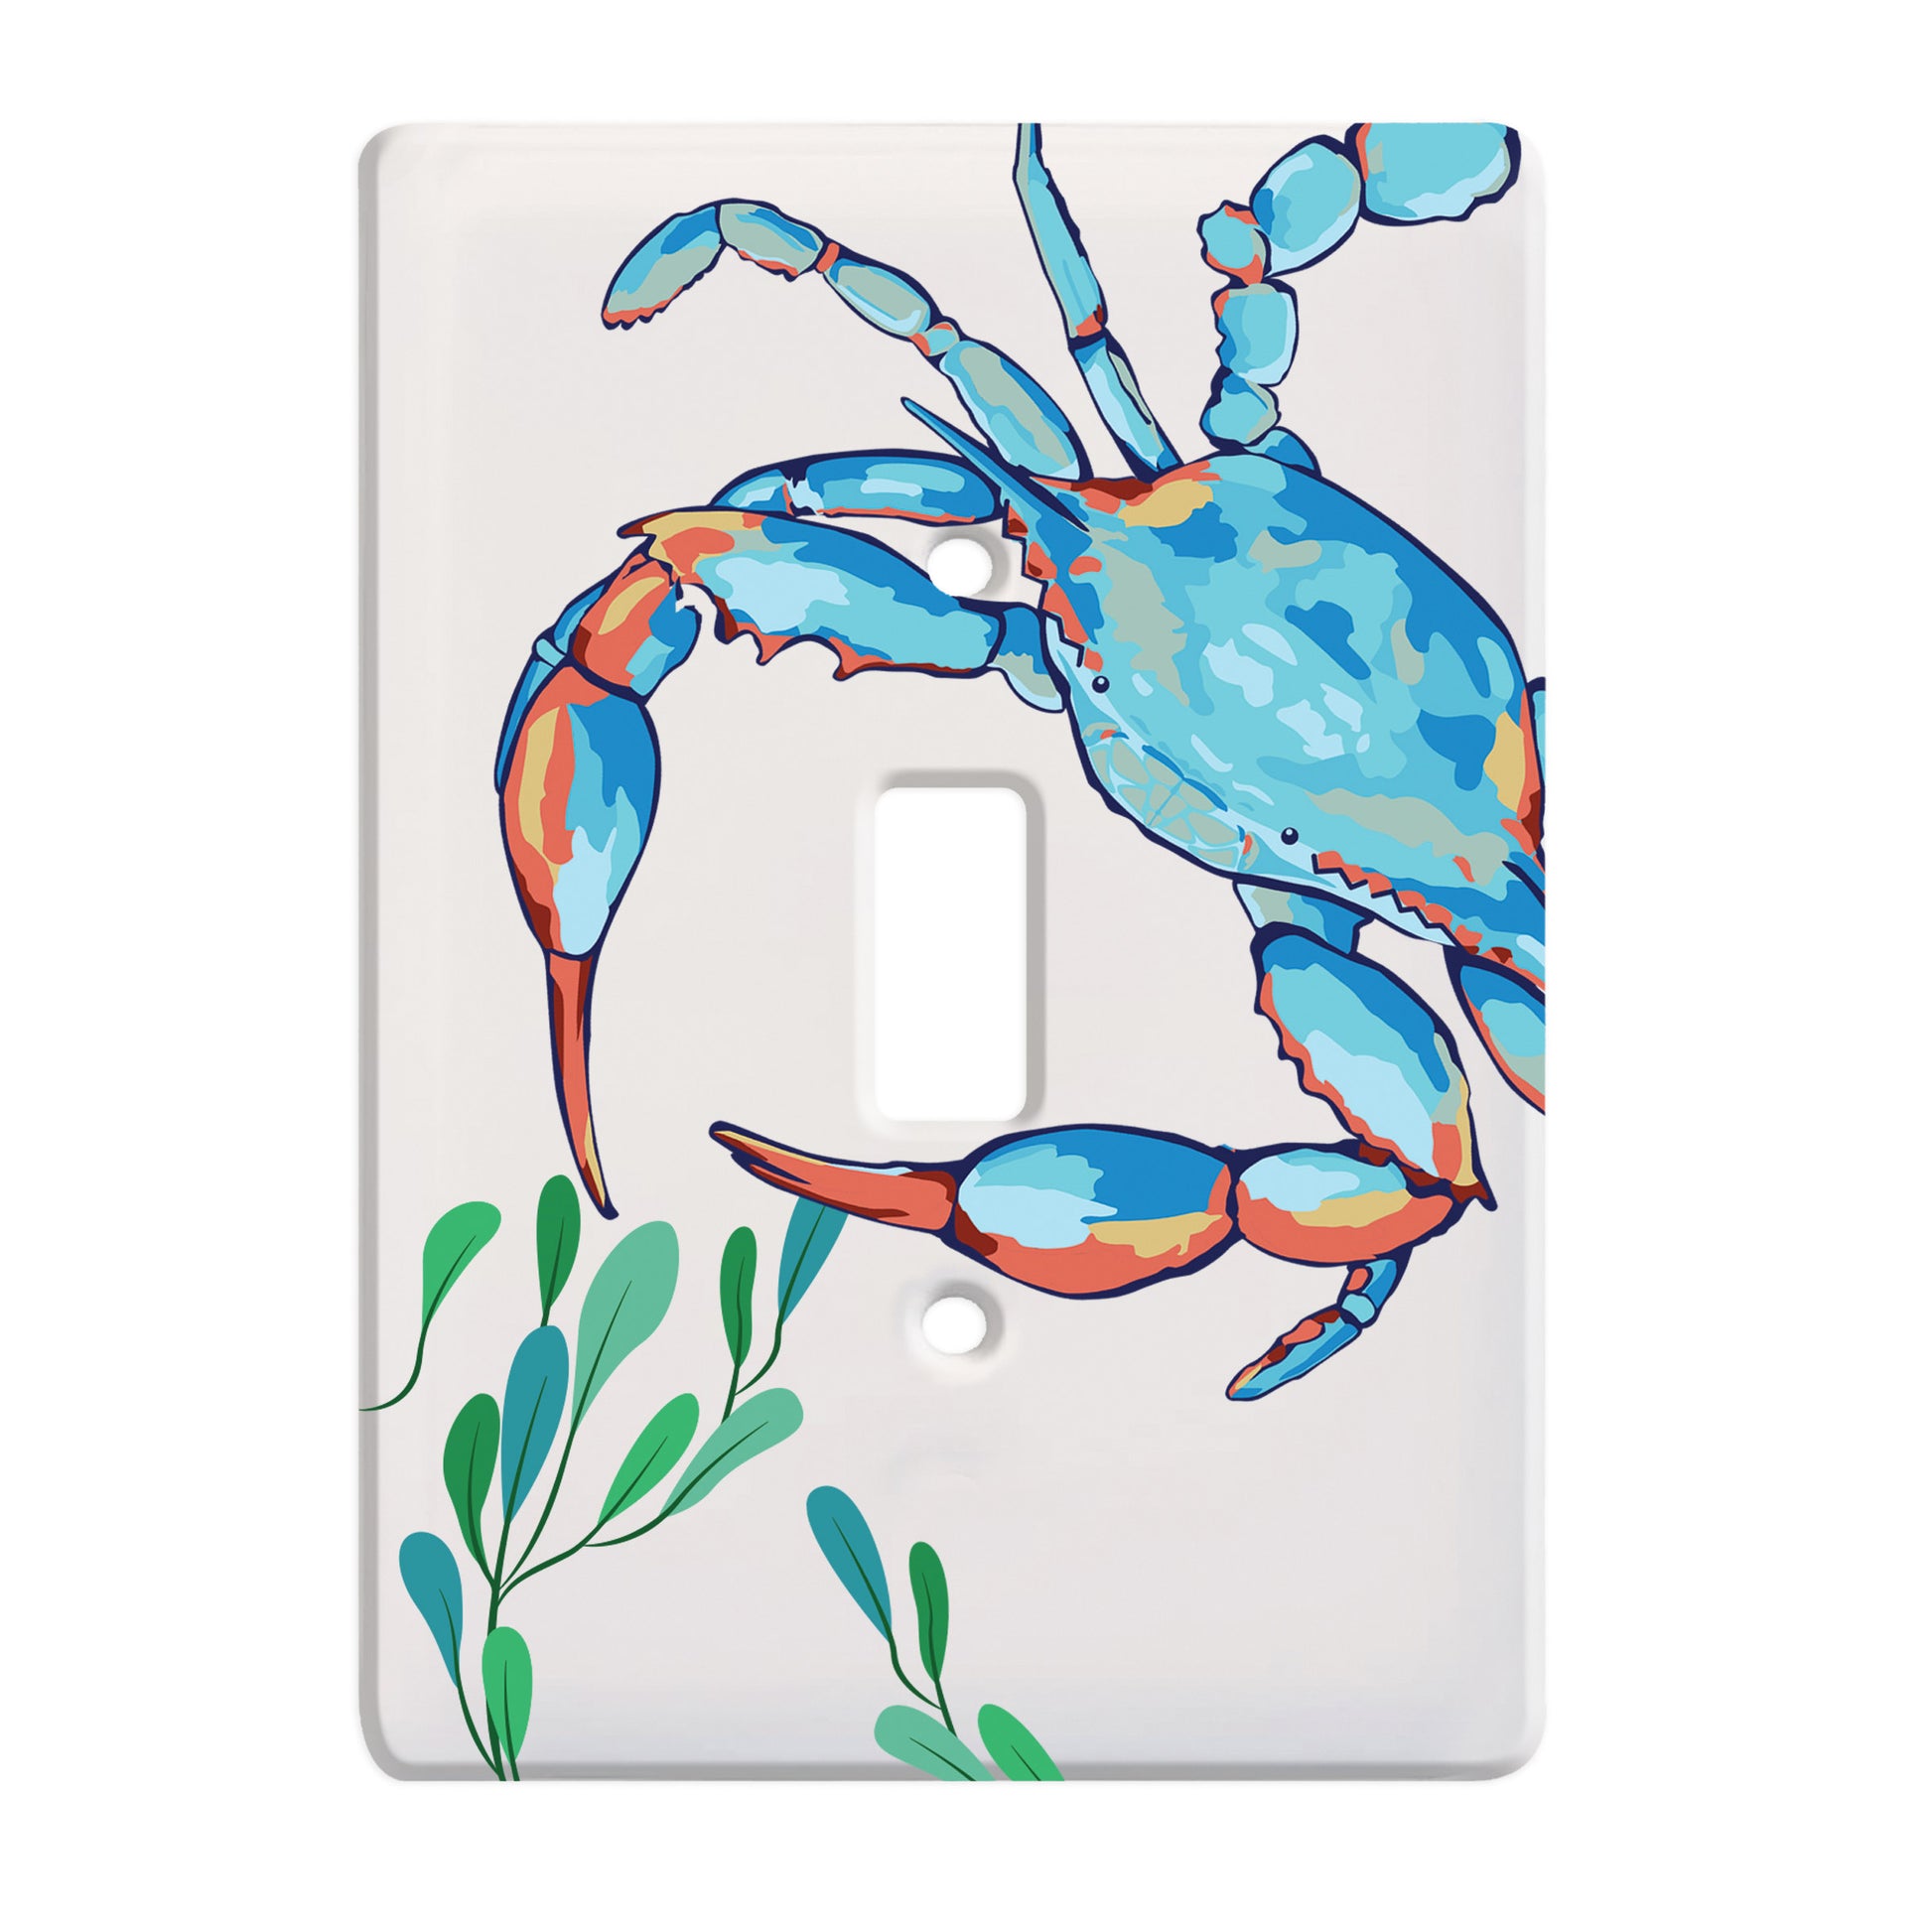 white ceramic single toggle switch plate featuring graphic of blue crab with orange accents and green leaves.